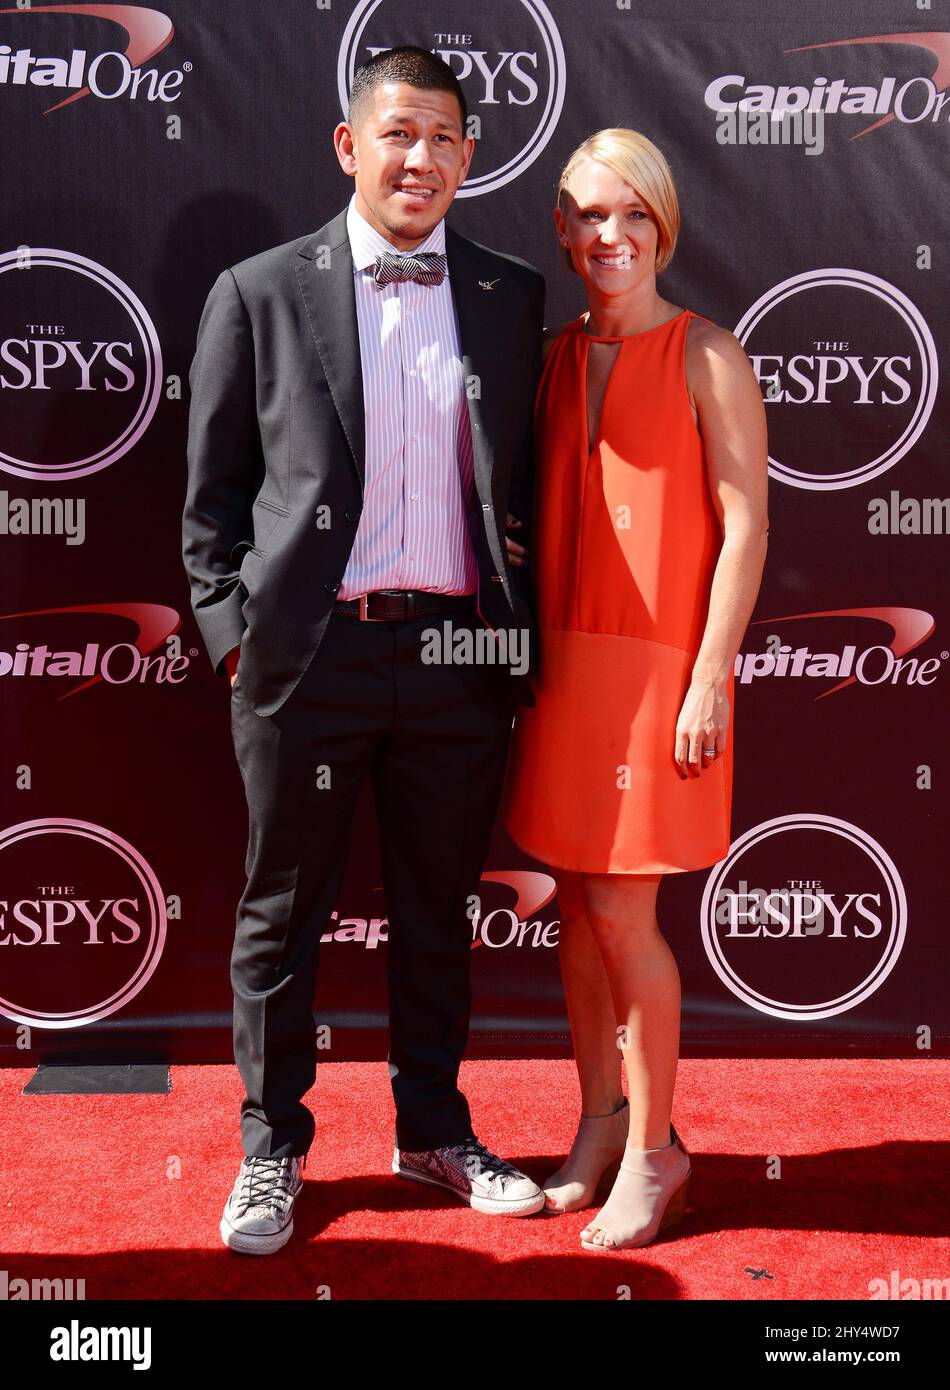 Nick Rimando arriving at the 2014 ESPYS held at Nokia Theatre, L.A. Live. Stock Photo